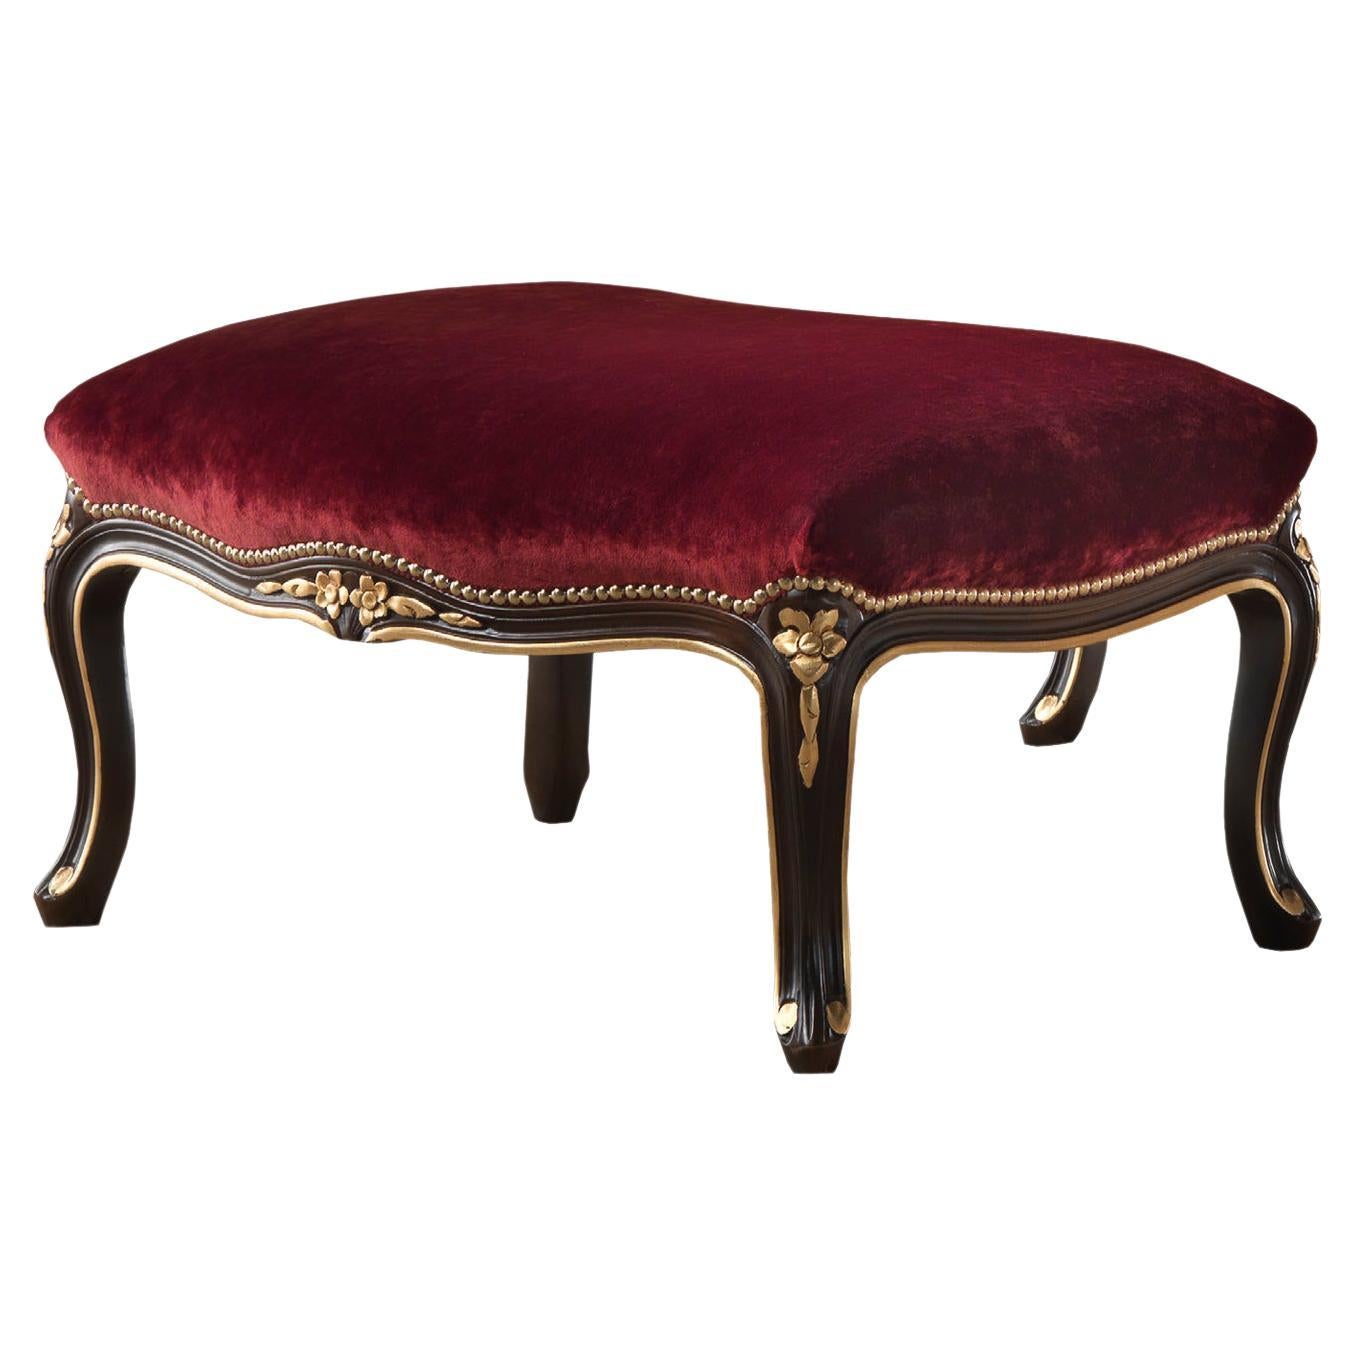 Red Satin and Dark Walnut Finish Footstool by Modenese Gastone Interiors For Sale